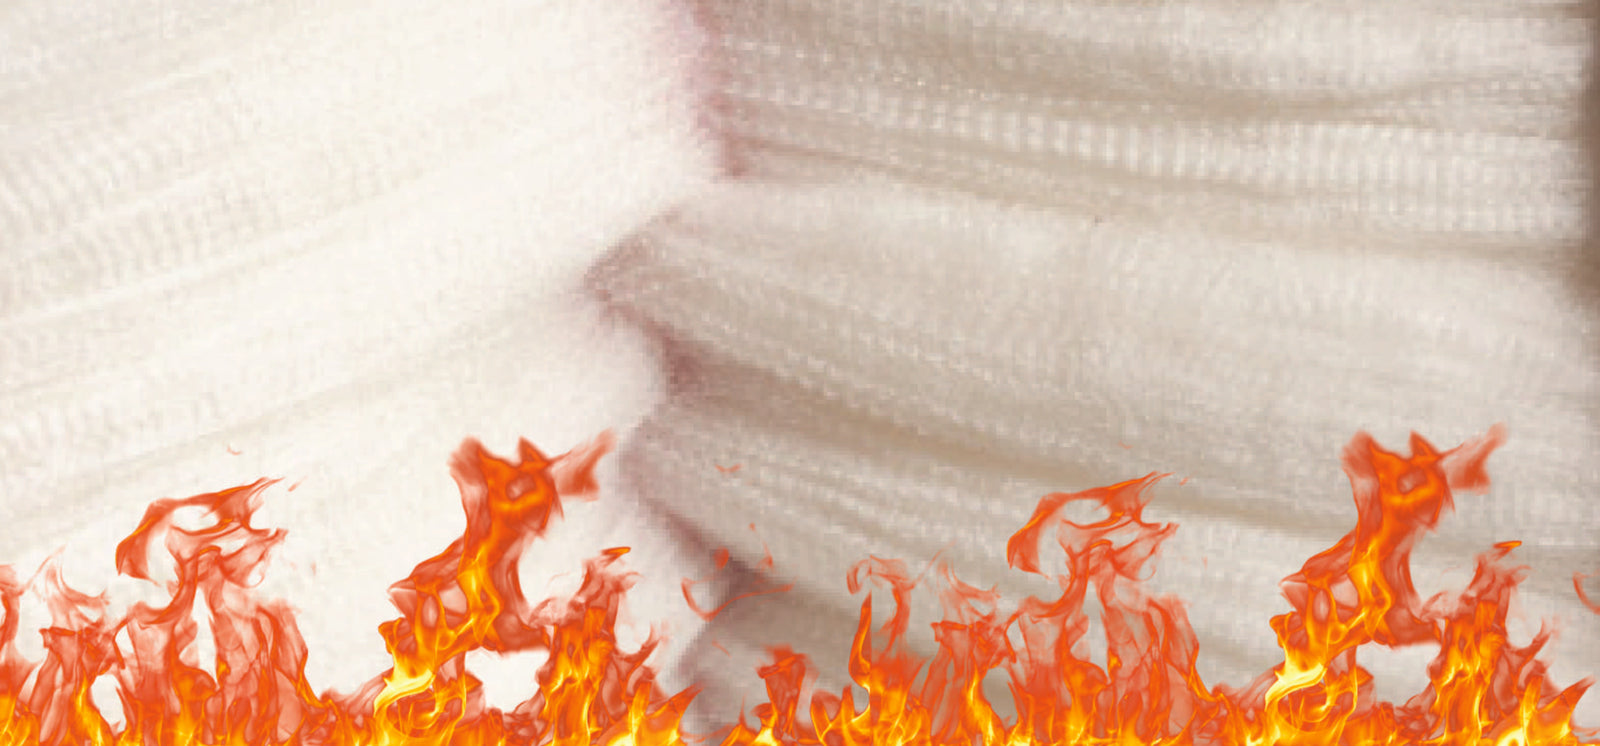 How wool is fire resistant compared to other fibres - MiniJumbuk